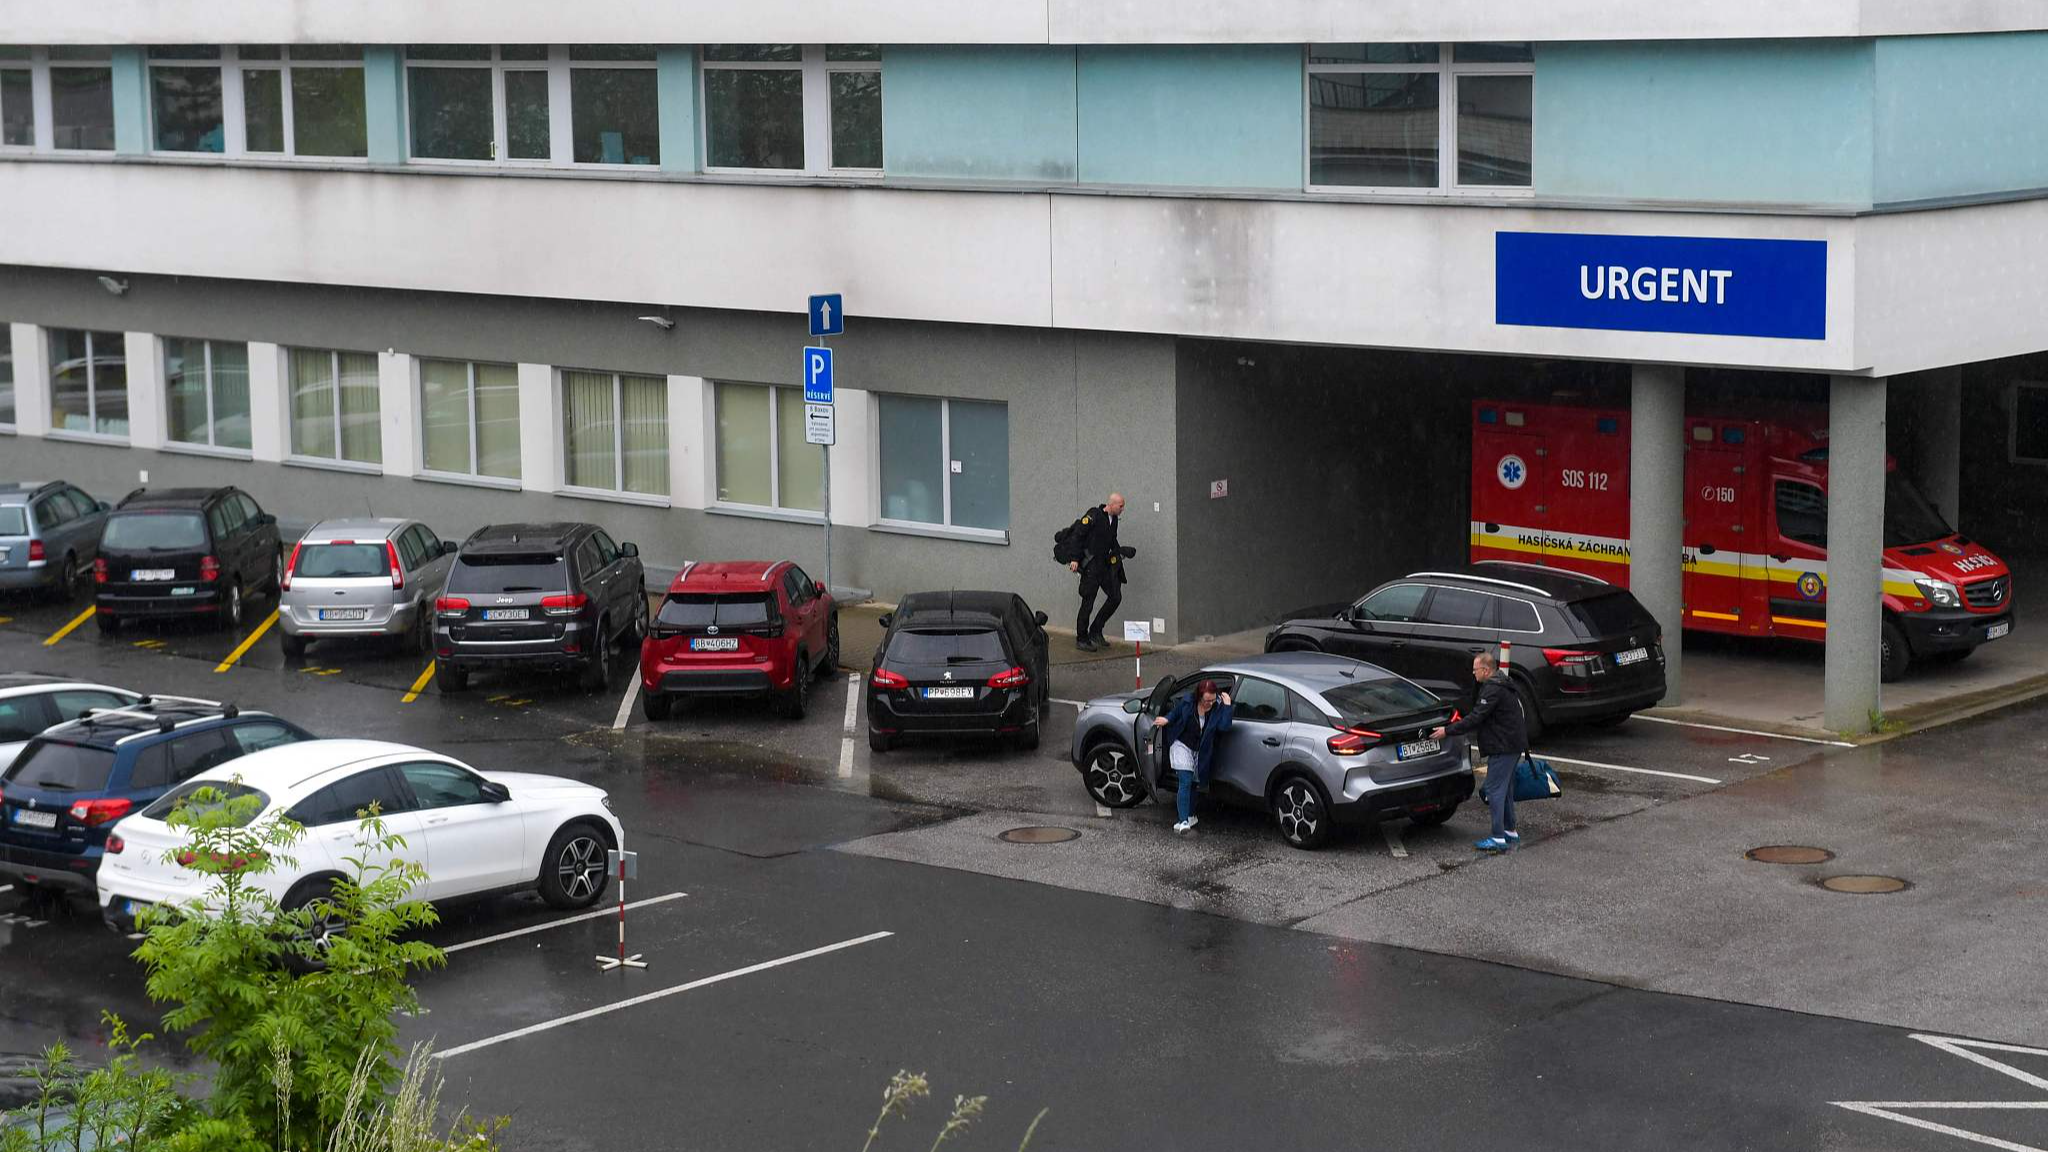 Suspect to go to court after shooting of Slovak PM